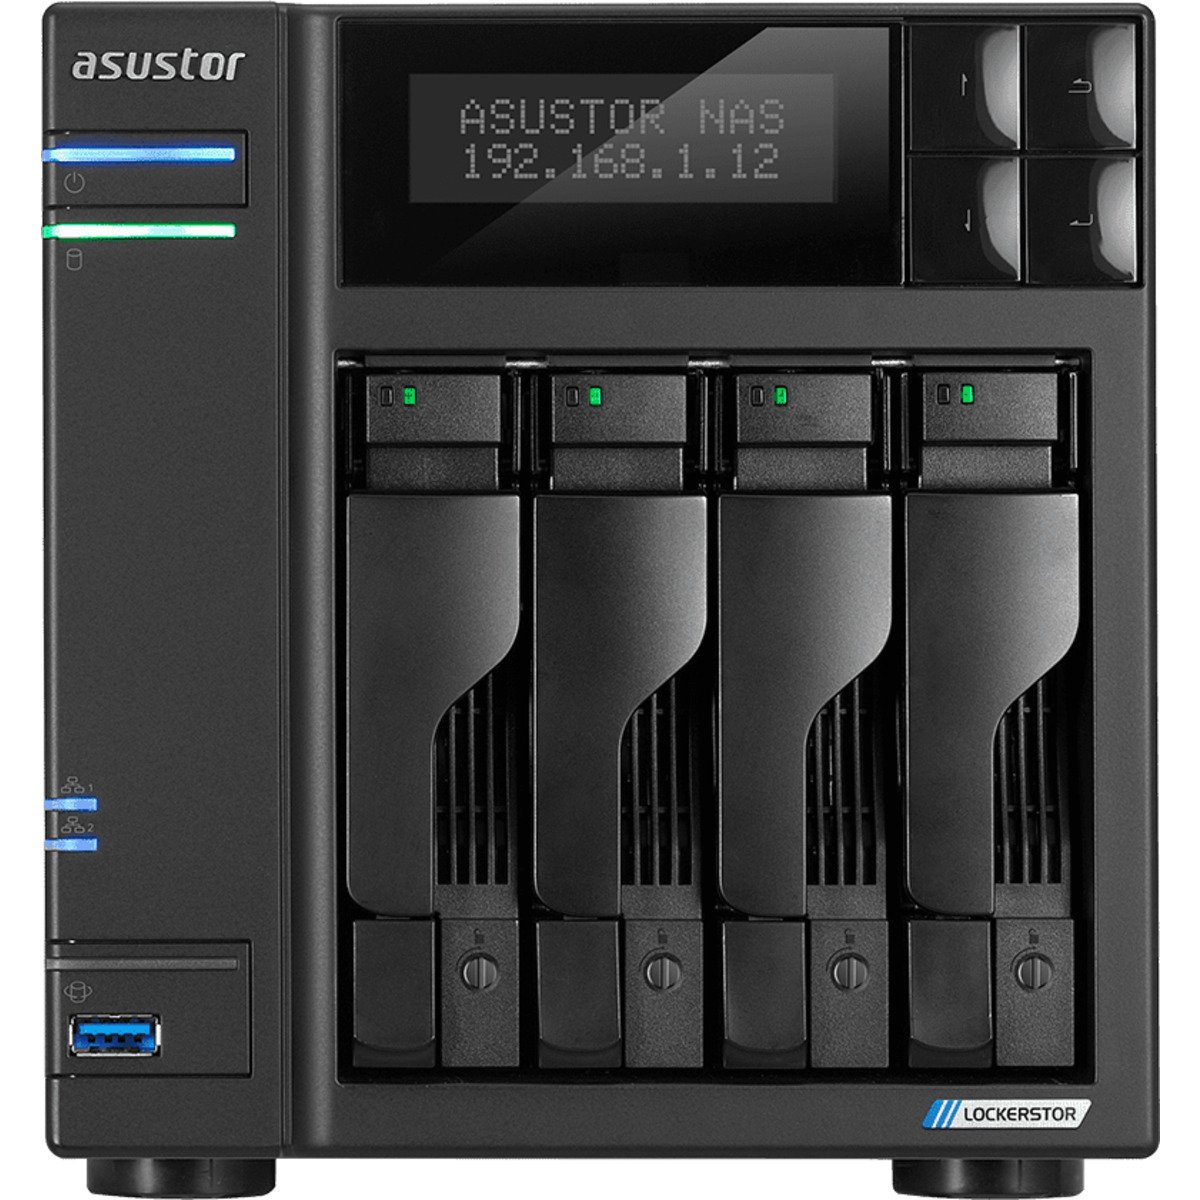 ASUSTOR AS6604T Lockerstor 4 4tb 4-Bay Desktop Multimedia / Power User / Business NAS - Network Attached Storage Device 2x2tb Seagate BarraCuda ST2000DM008 3.5 7200rpm SATA 6Gb/s HDD CONSUMER Class Drives Installed - Burn-In Tested - FREE RAM UPGRADE AS6604T Lockerstor 4